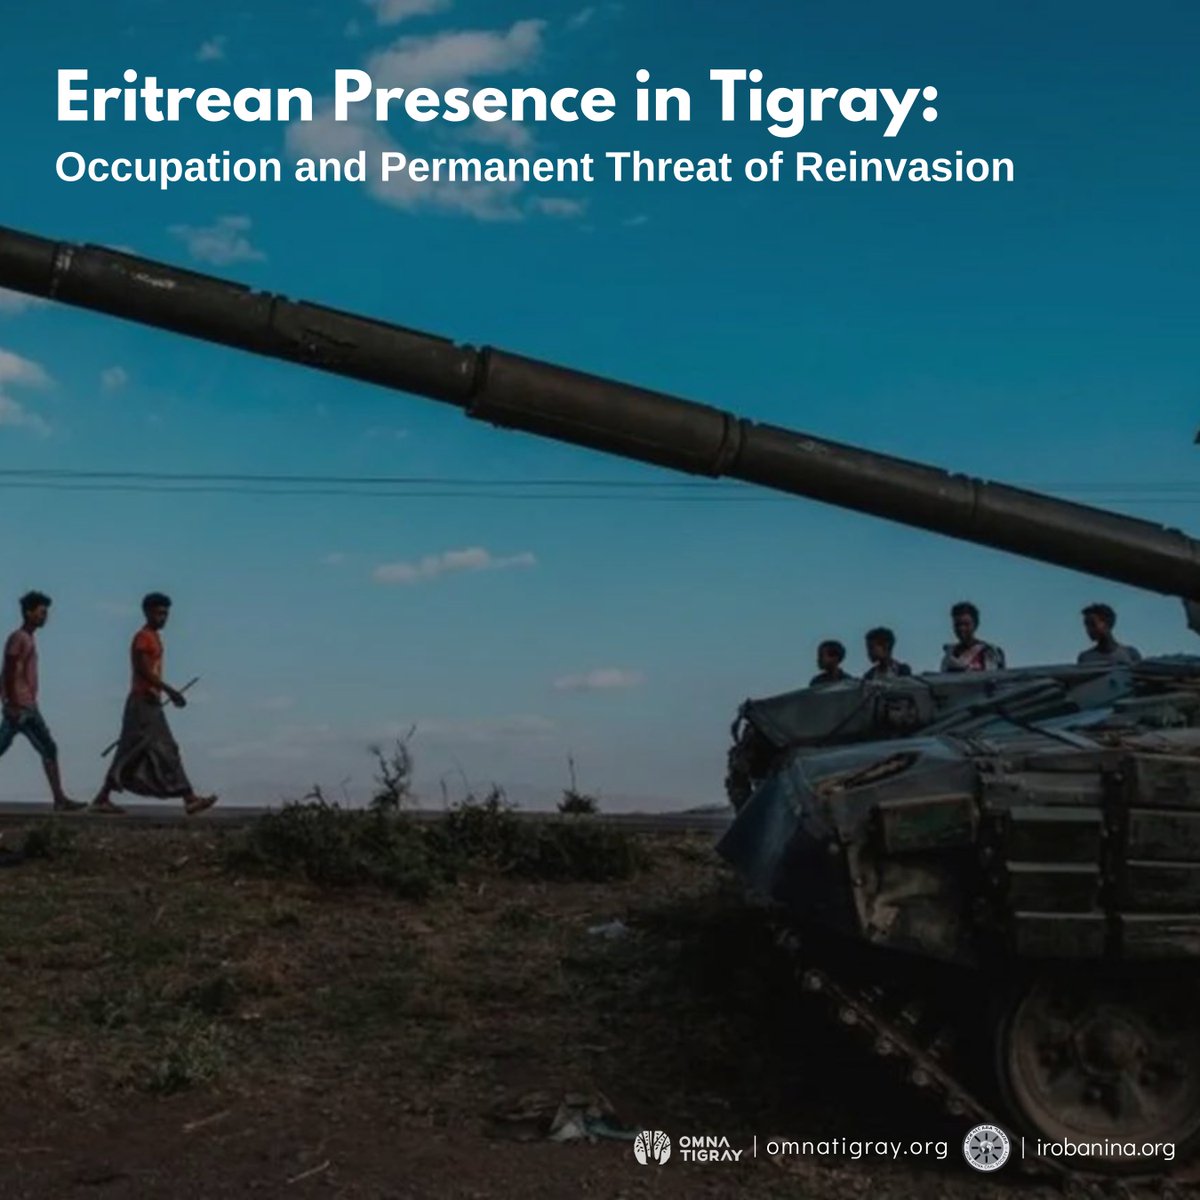 Eritrean forces are perpetrators of #TigrayGenocide. Eritrean troops have been present in Tigray since Nov. 2020. Today, 🇪🇷 troops still occupy parts of #Tigray, with a threat of reinvasion looming over unoccupied territories closest to the border & all of Tigray. Read more👇🏾